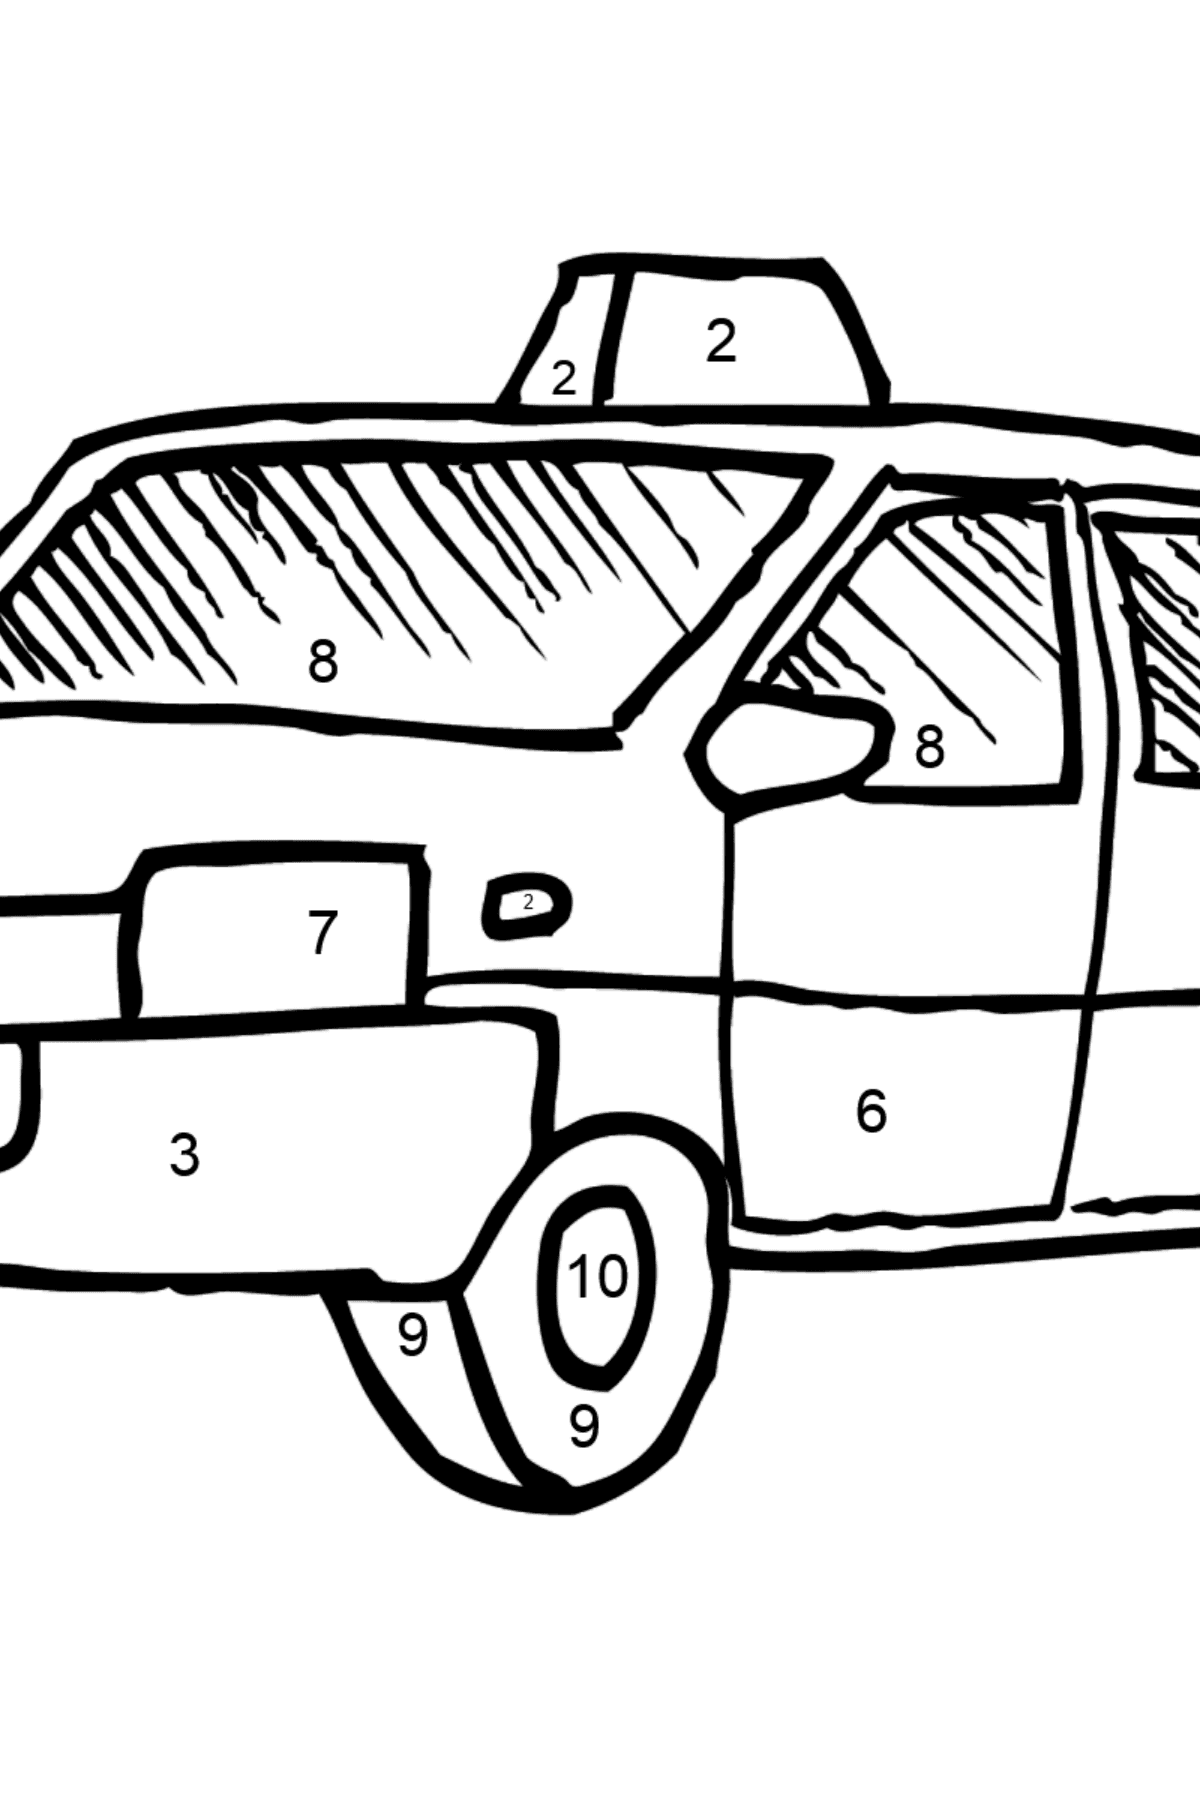 Coloring Page - A Yellow Taxi - Coloring by Numbers for Kids